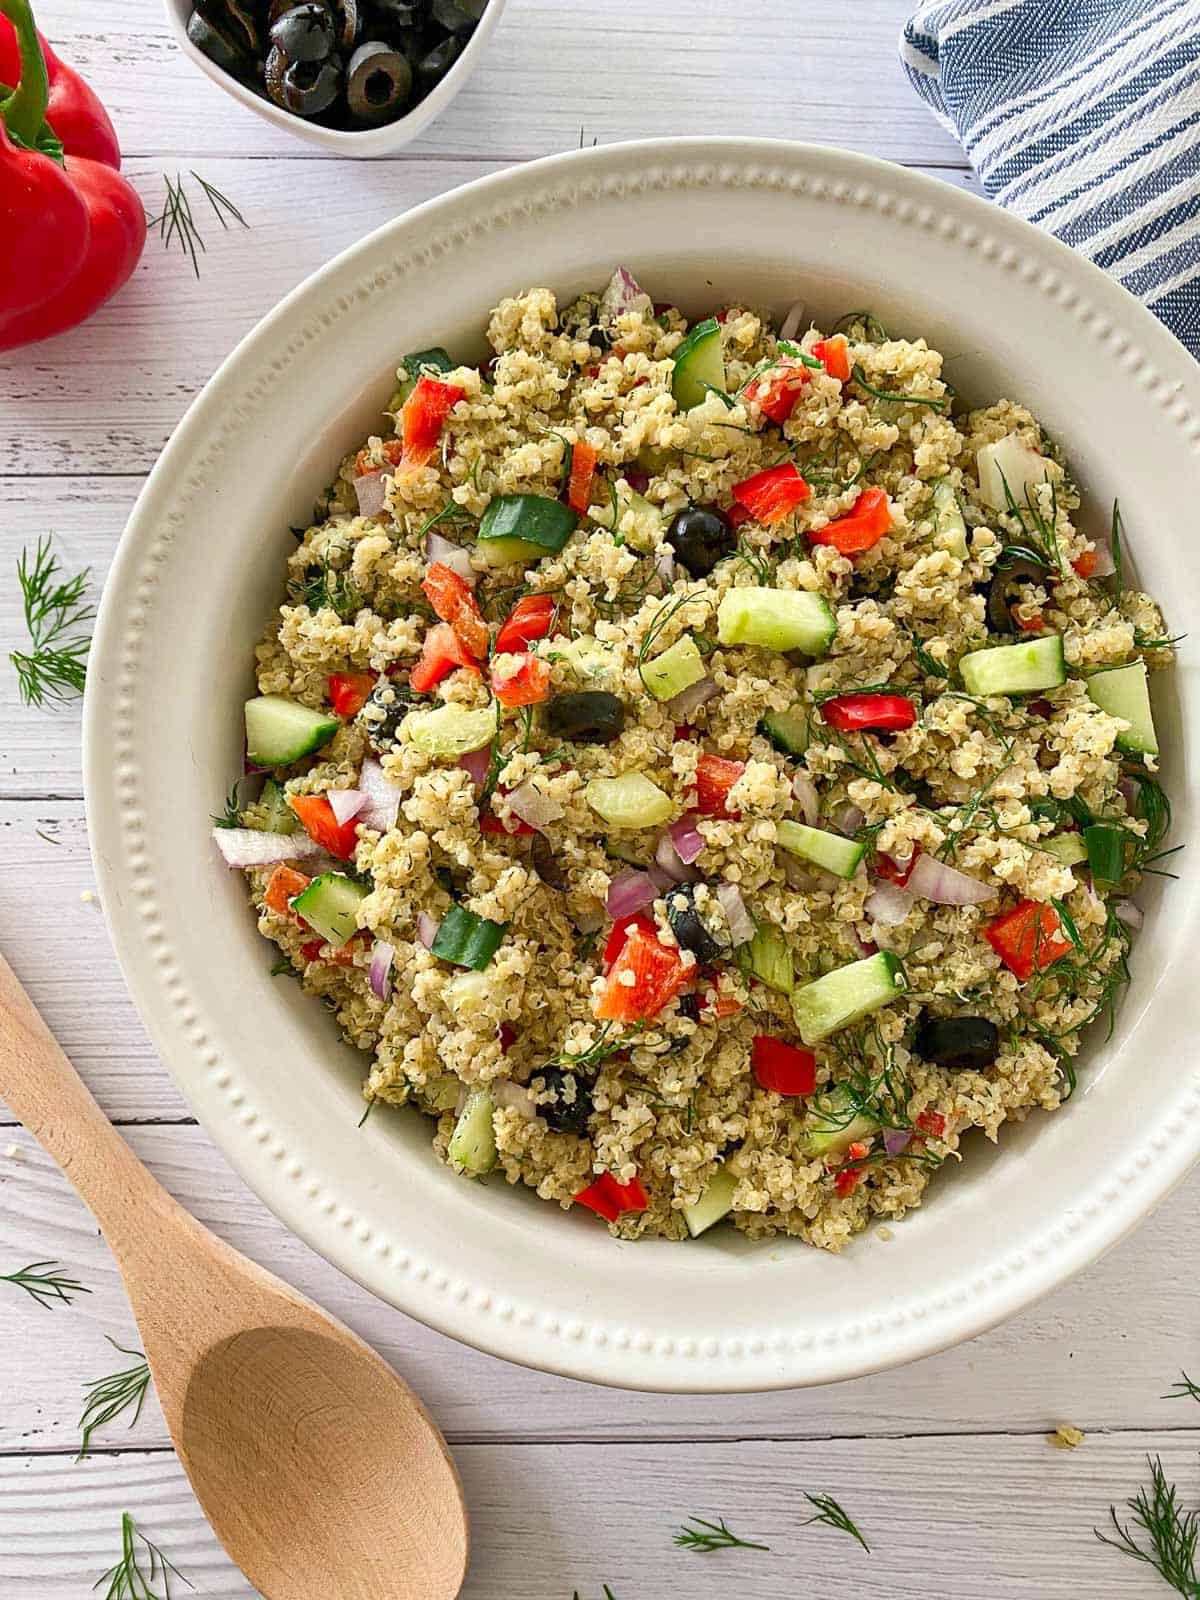 Large bowl of quinoa salad with red pepper, olives, and cucumber.